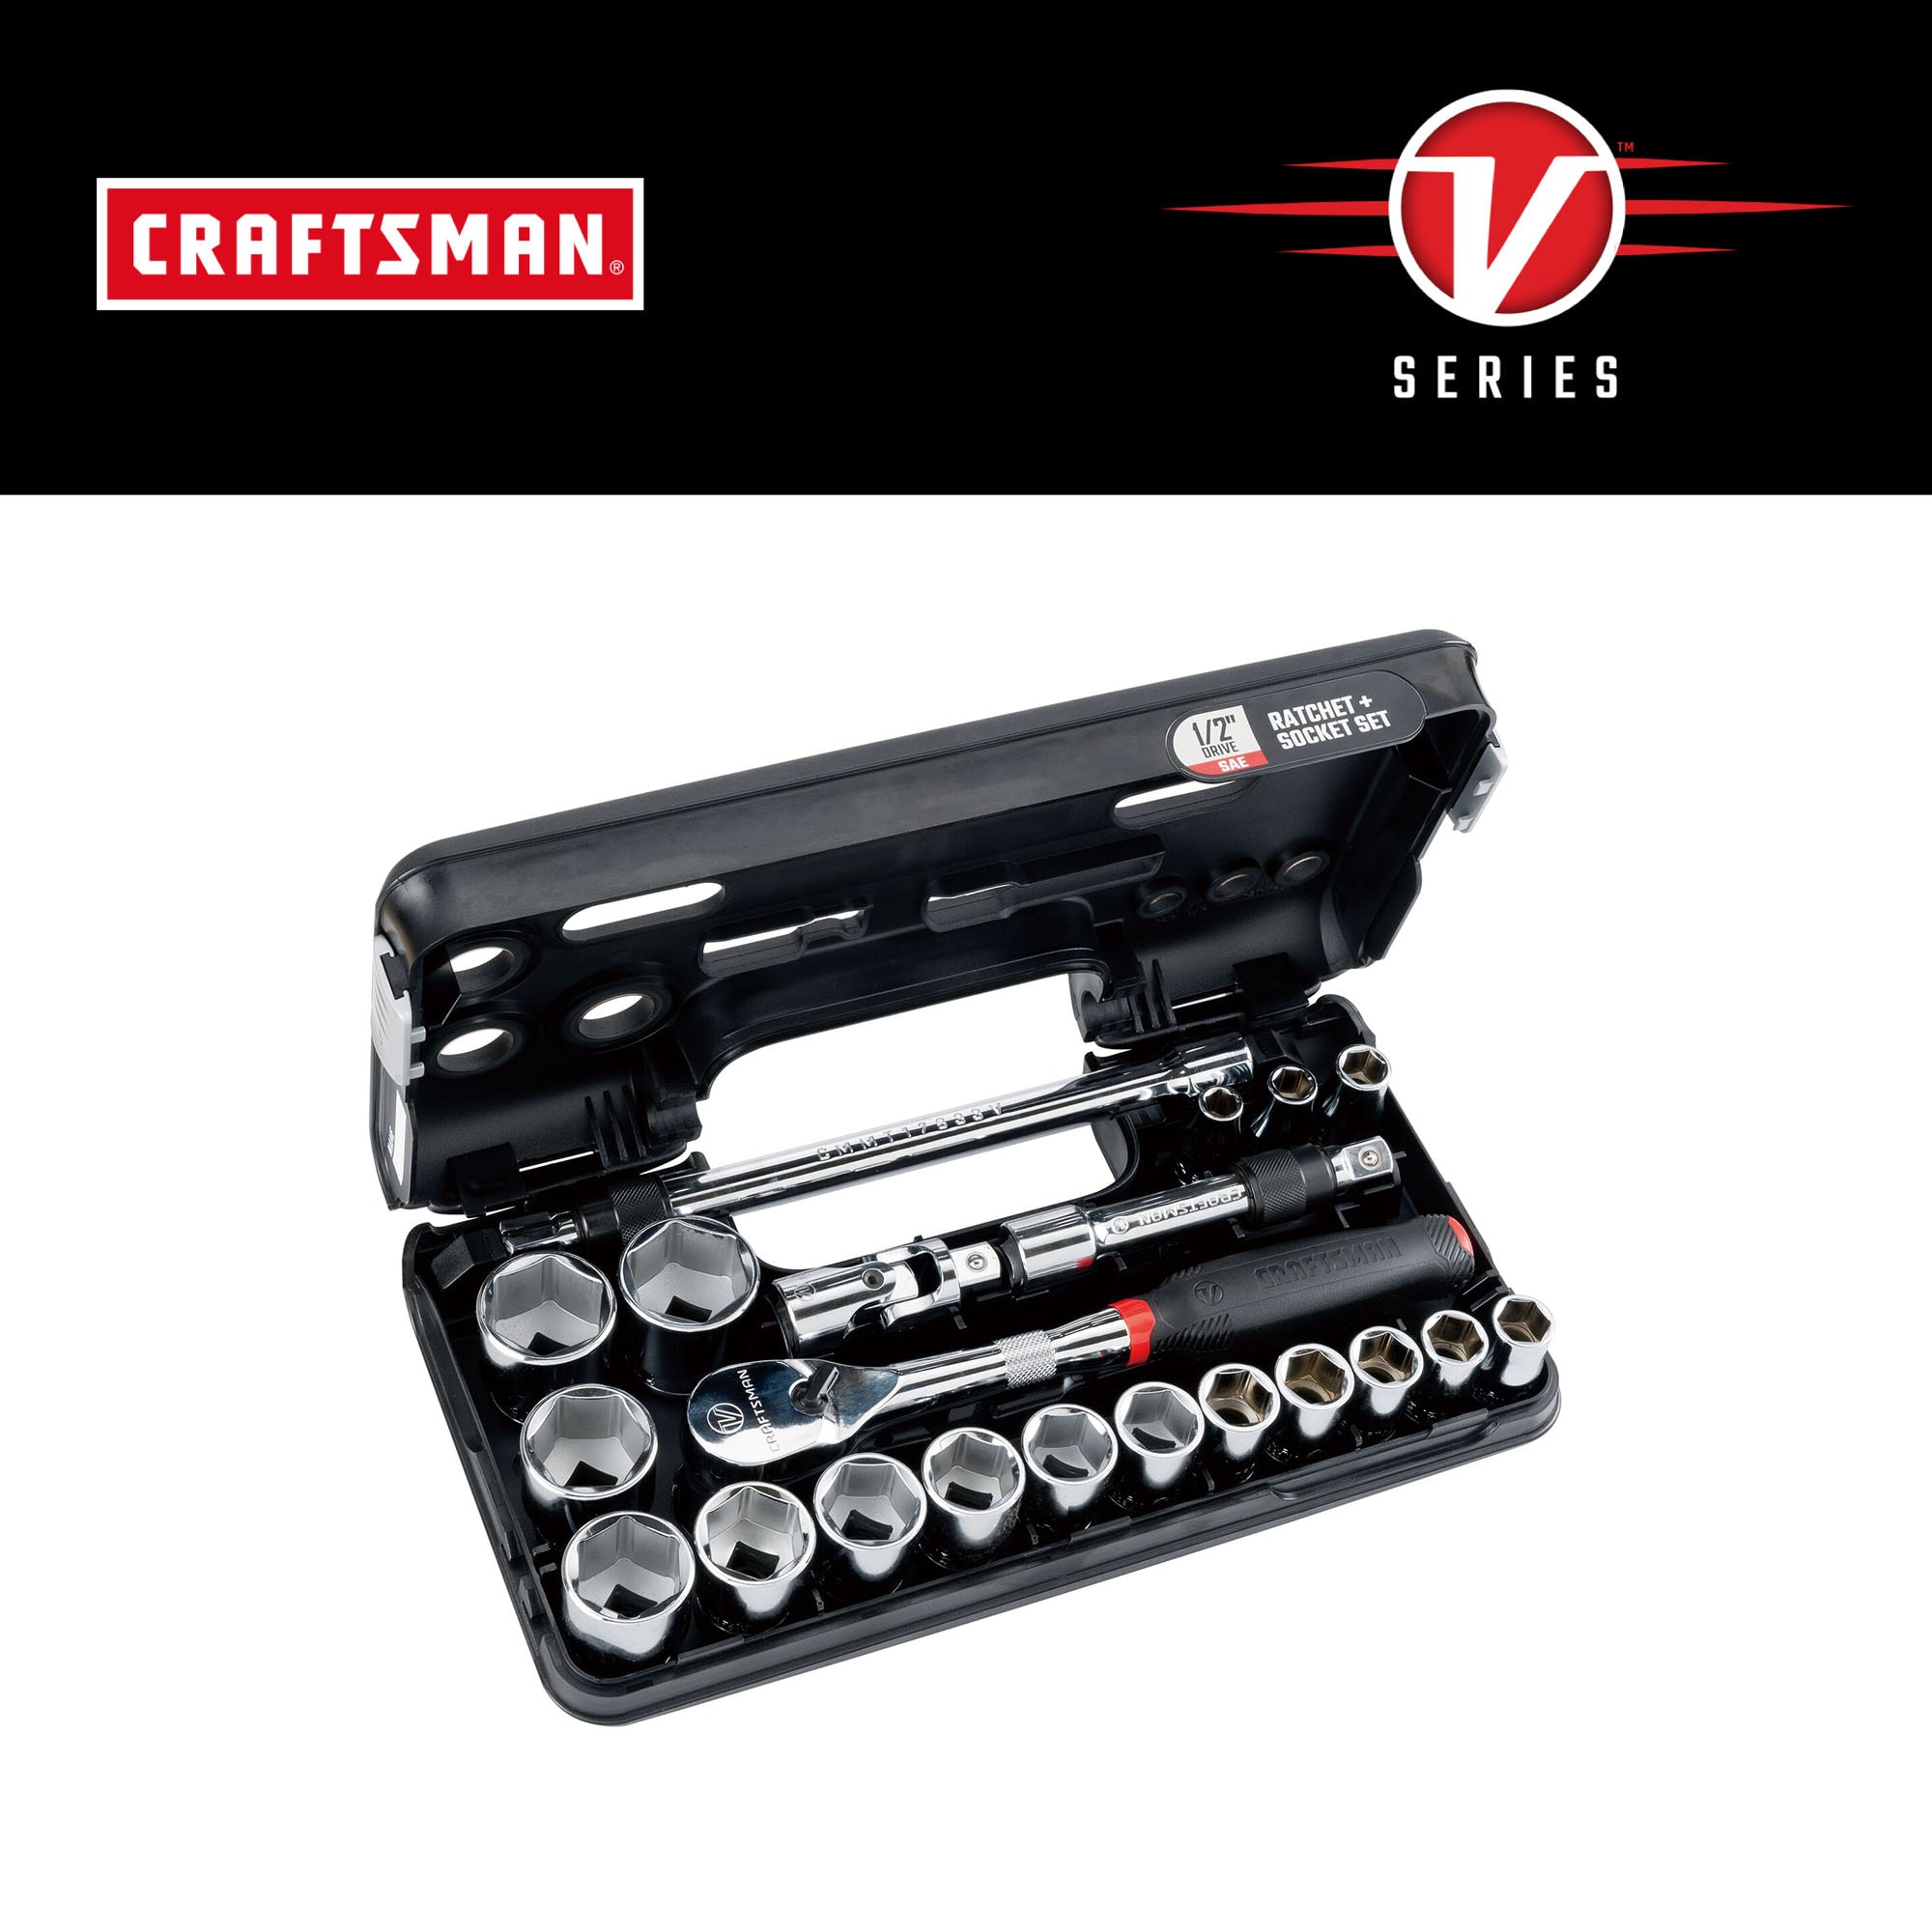 CRAFTSMAN 8-Piece 3/8-in, 1/2-in Drive Accessory Set in the Drive